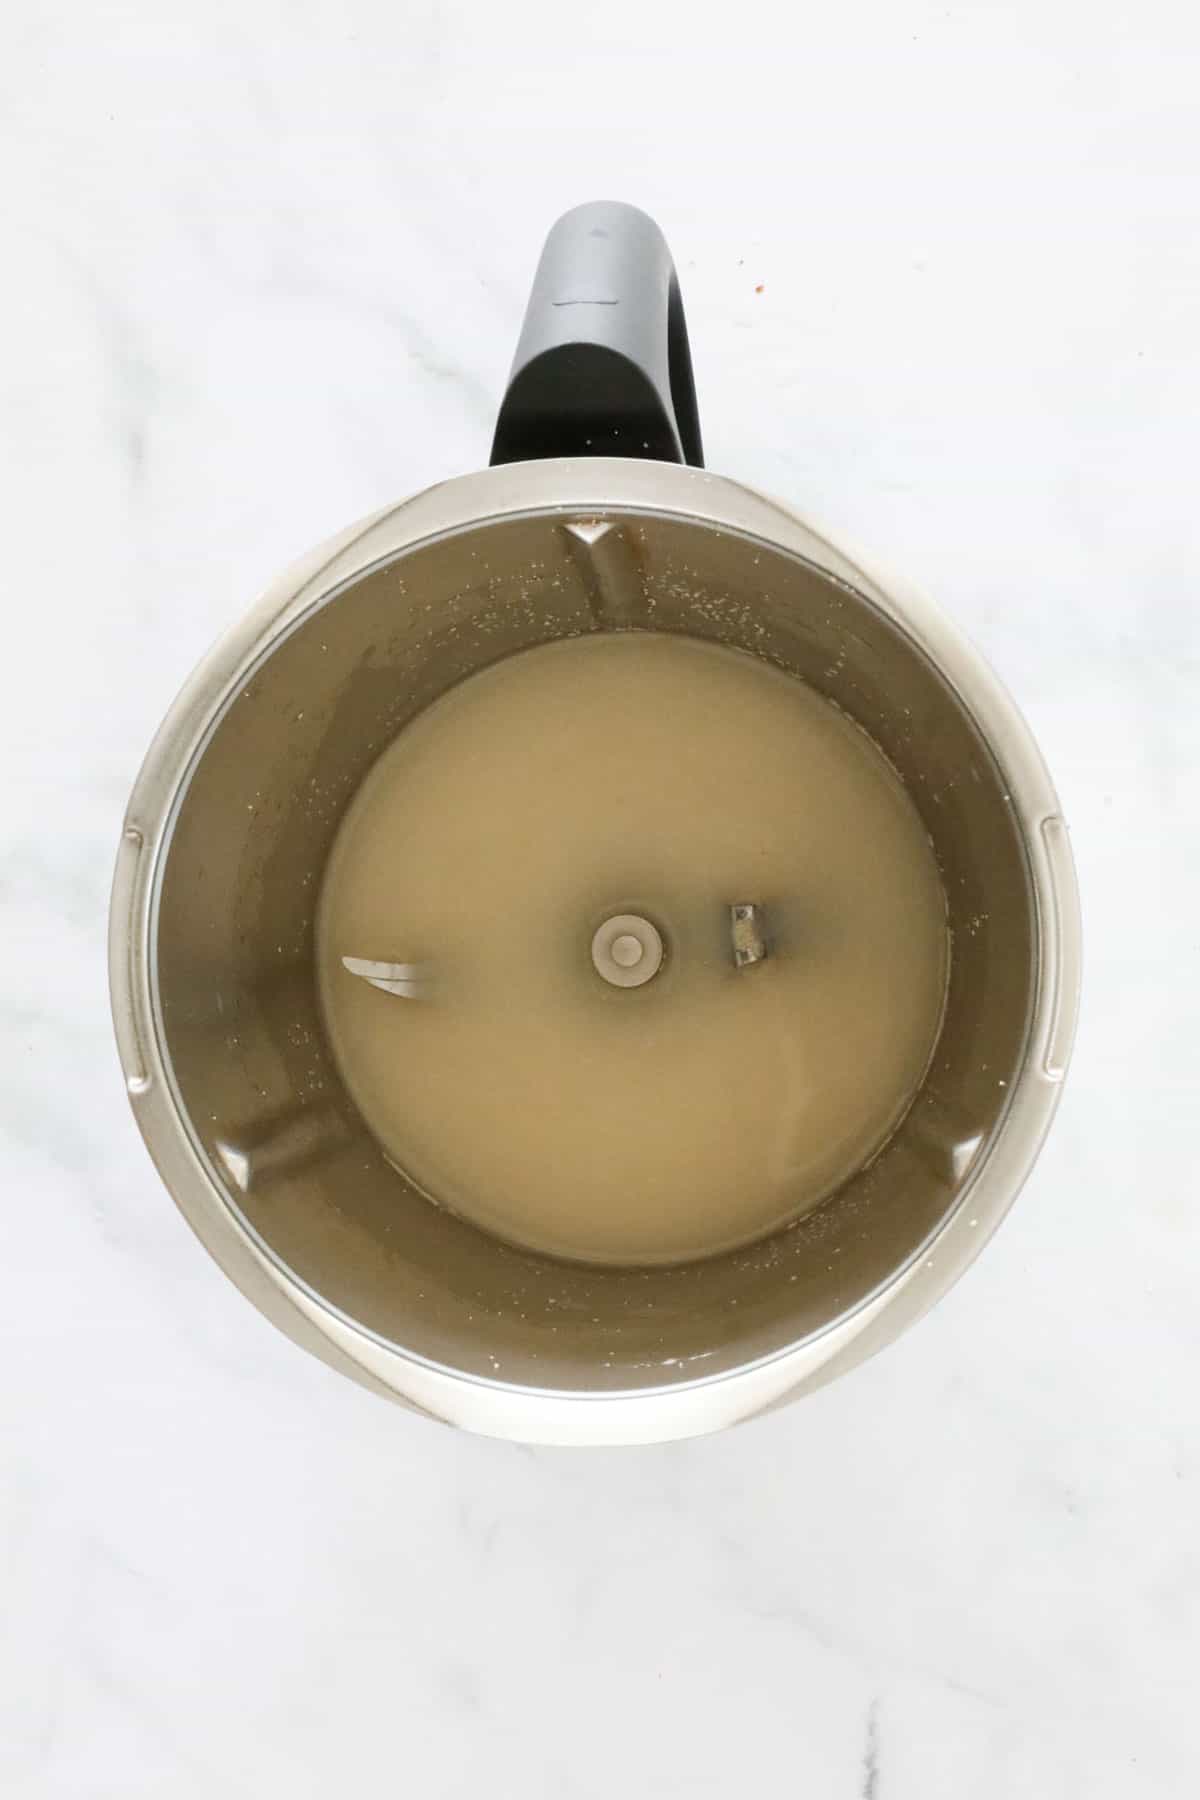 Yeast and water in a stainless jug.